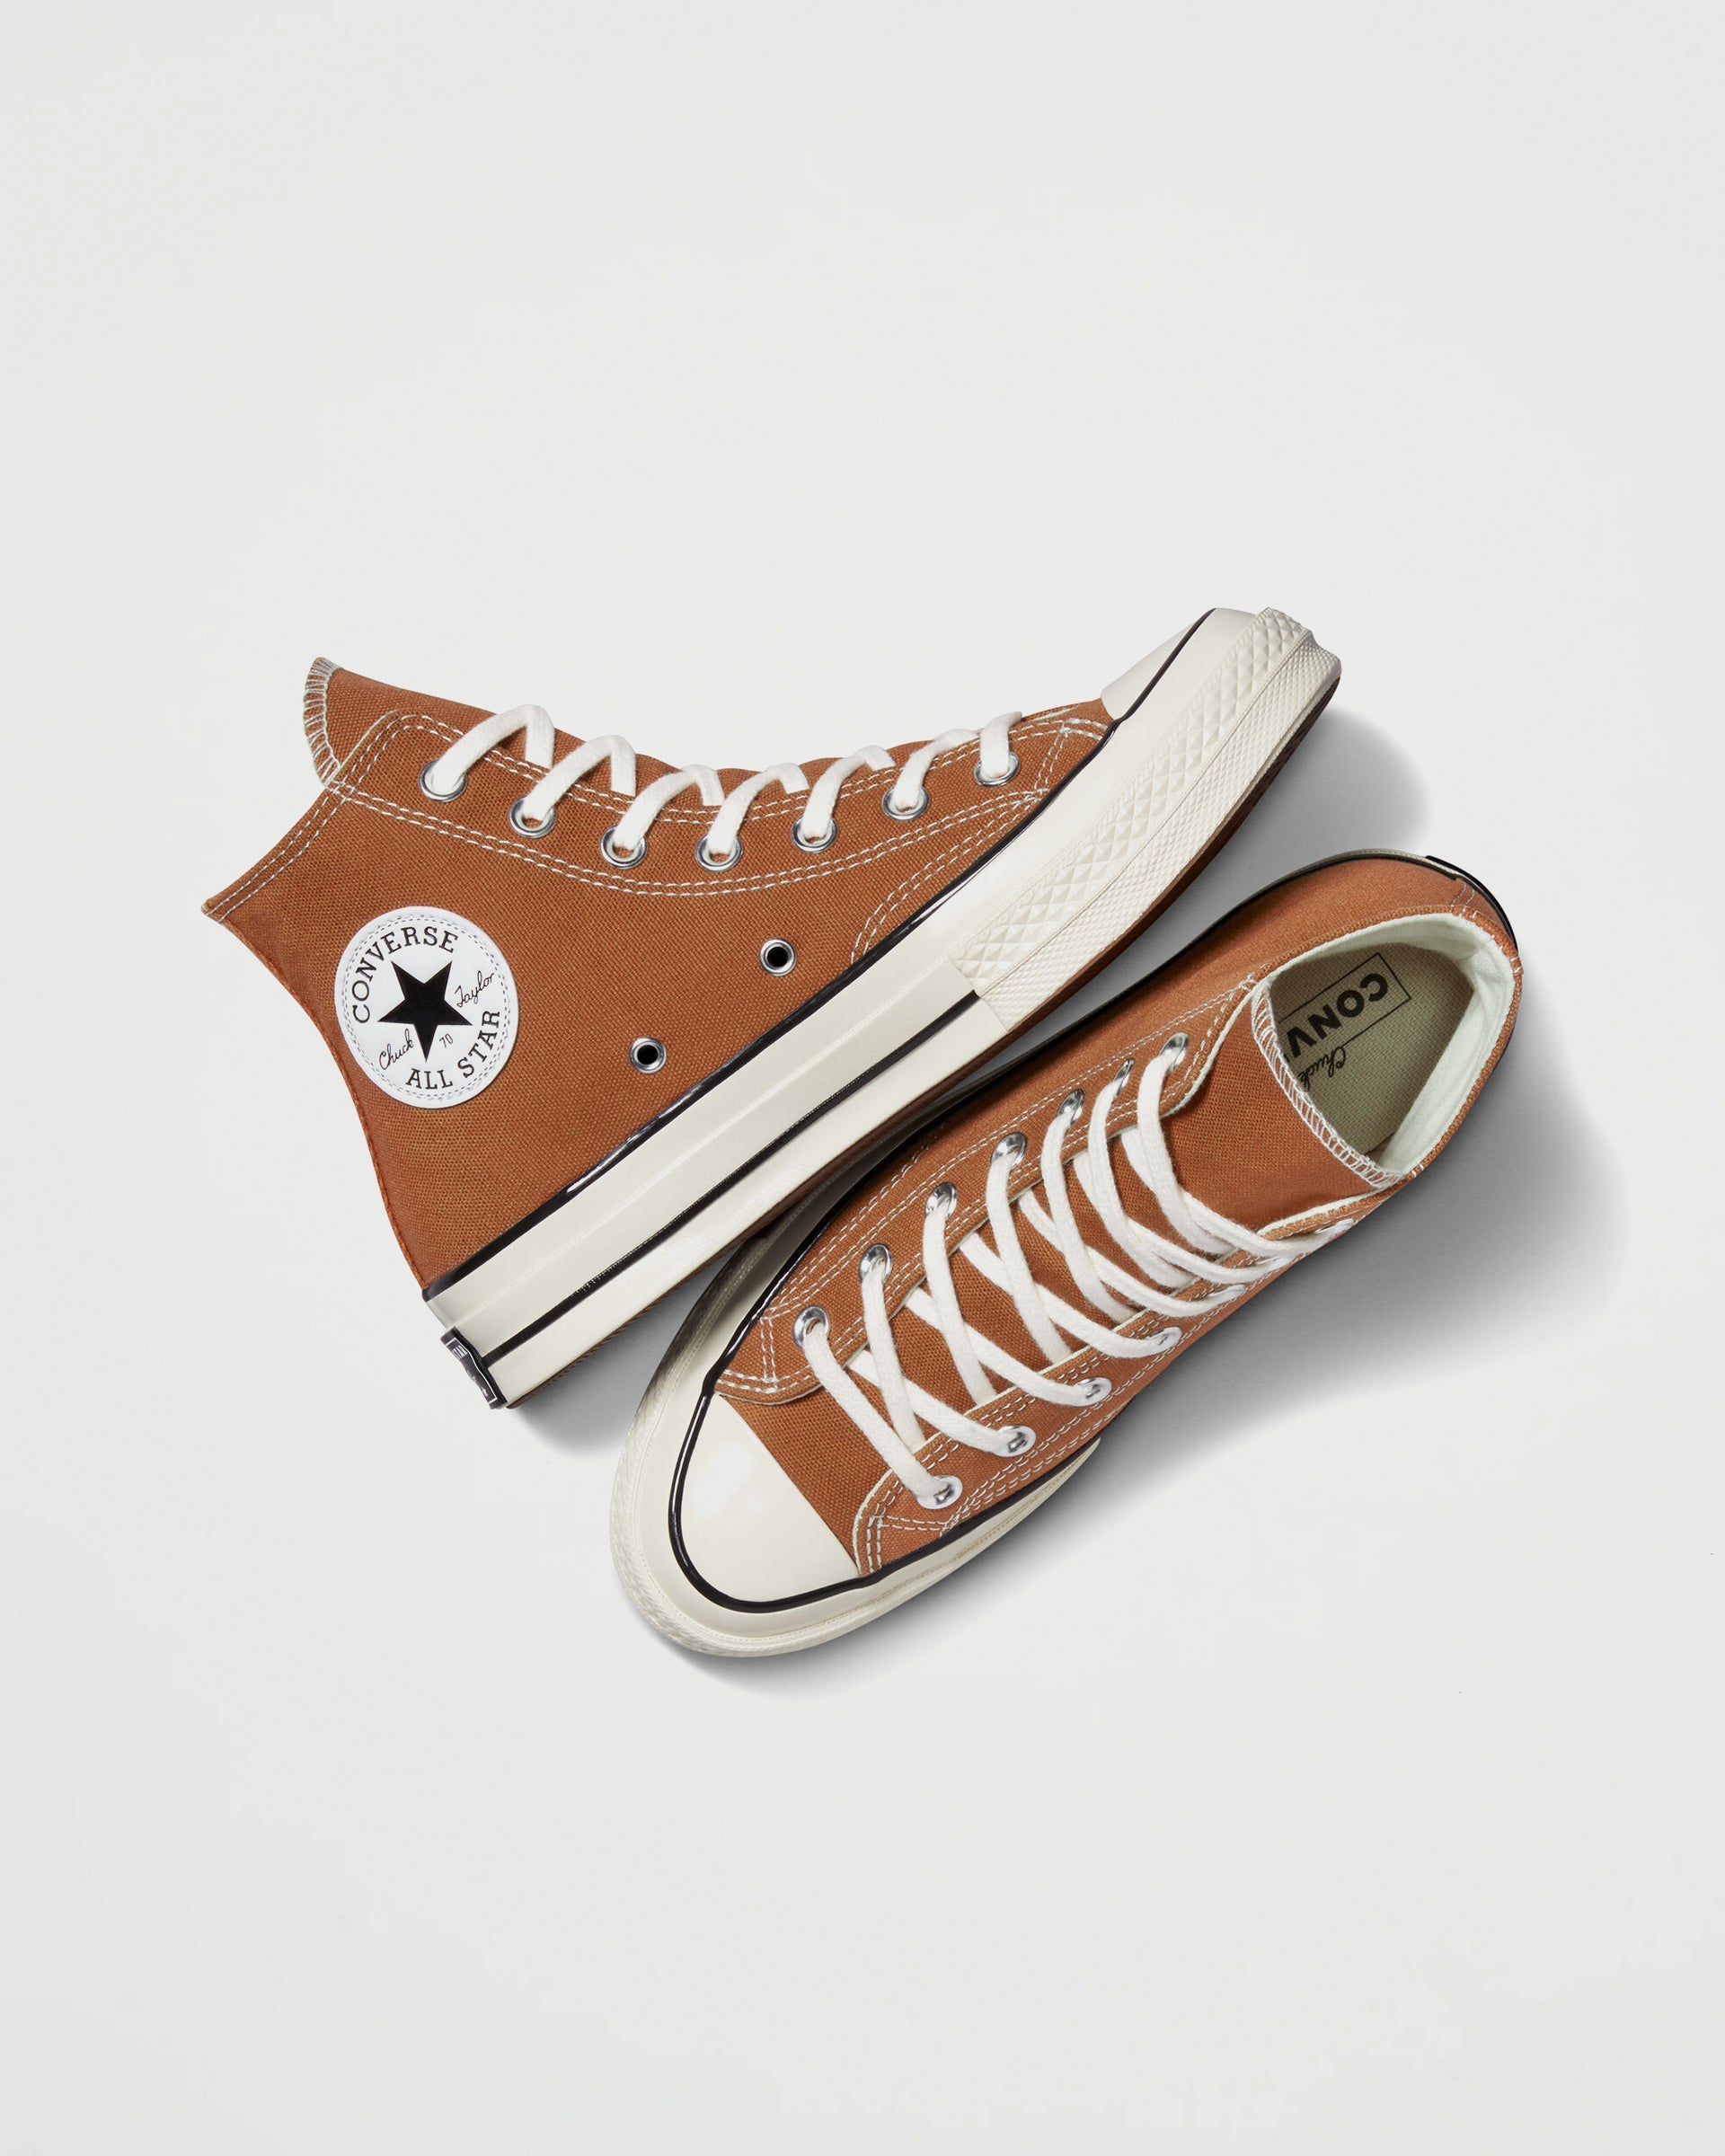 Converse Chuck 70 Hi Tawny Owl Shoes Sneakers Unisex